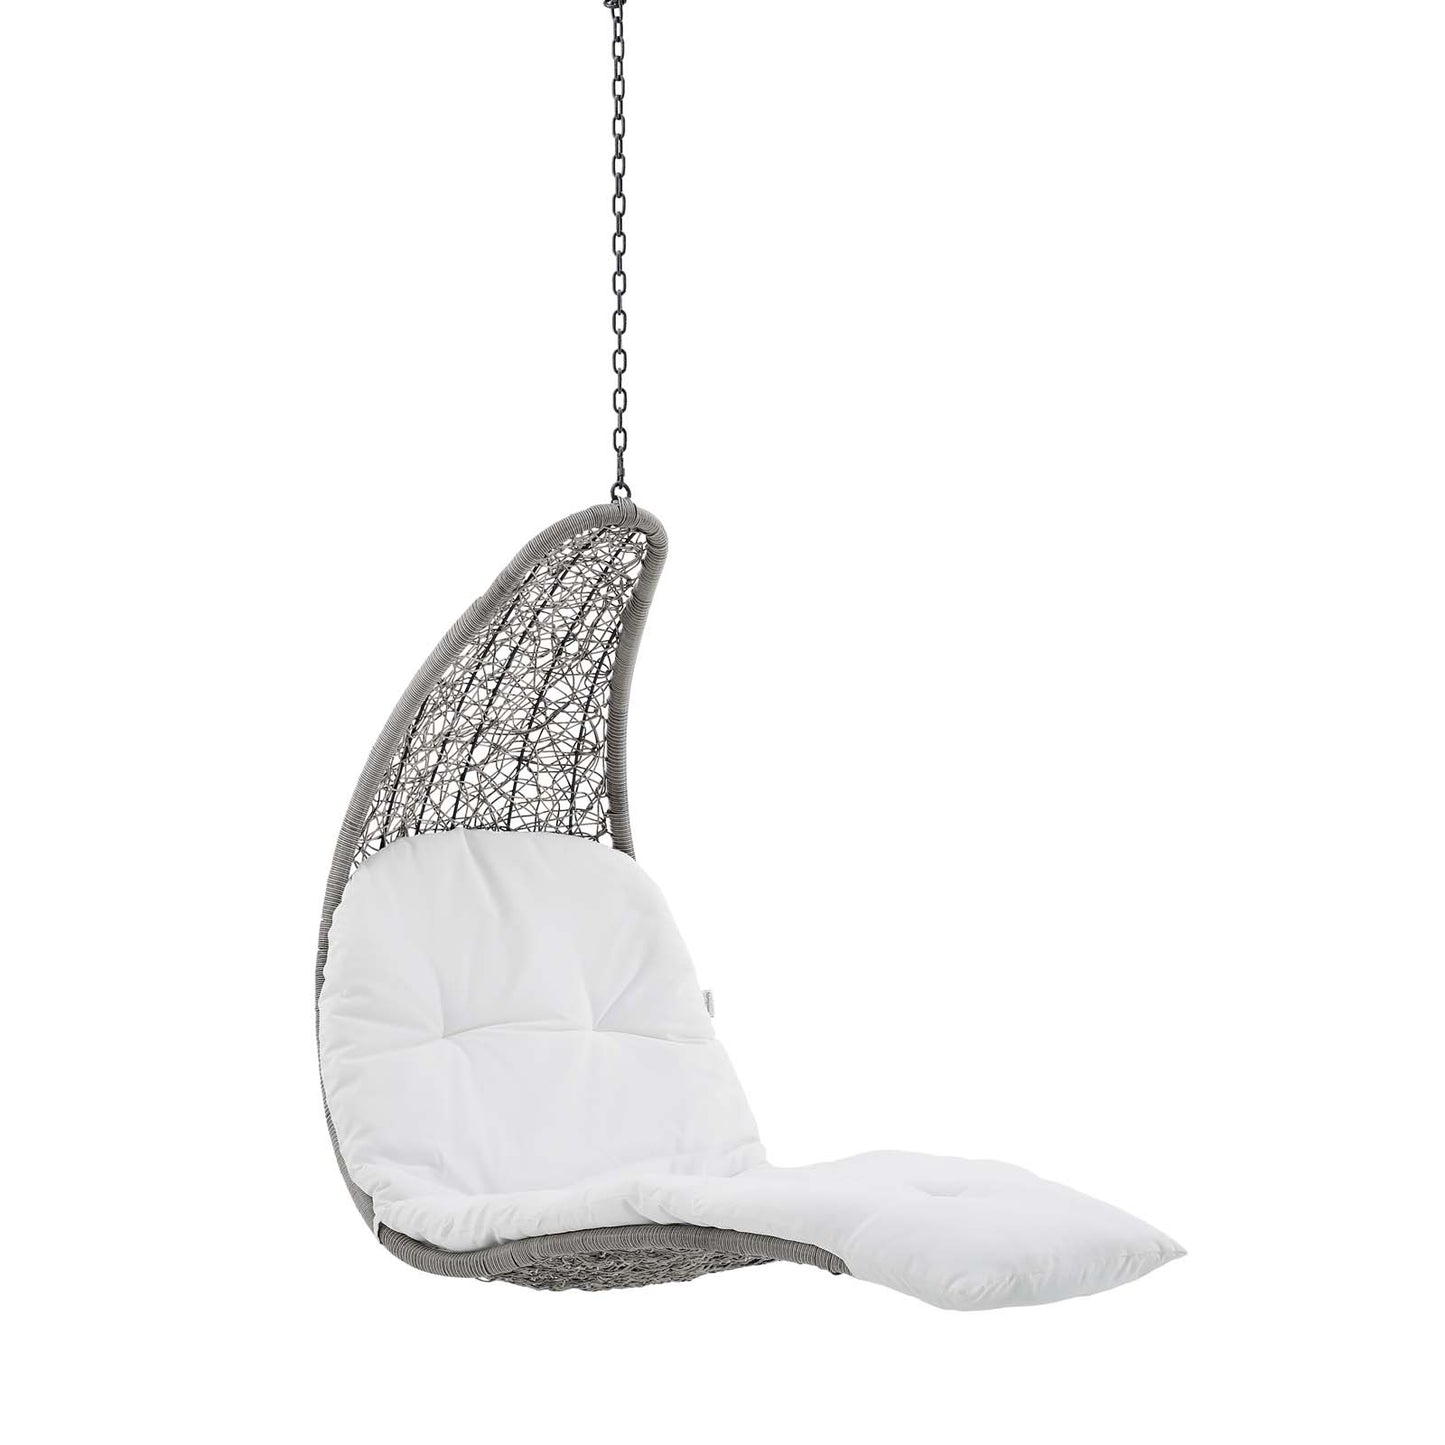 Landscape Hanging Chaise Lounge Outdoor Patio Swing Chair